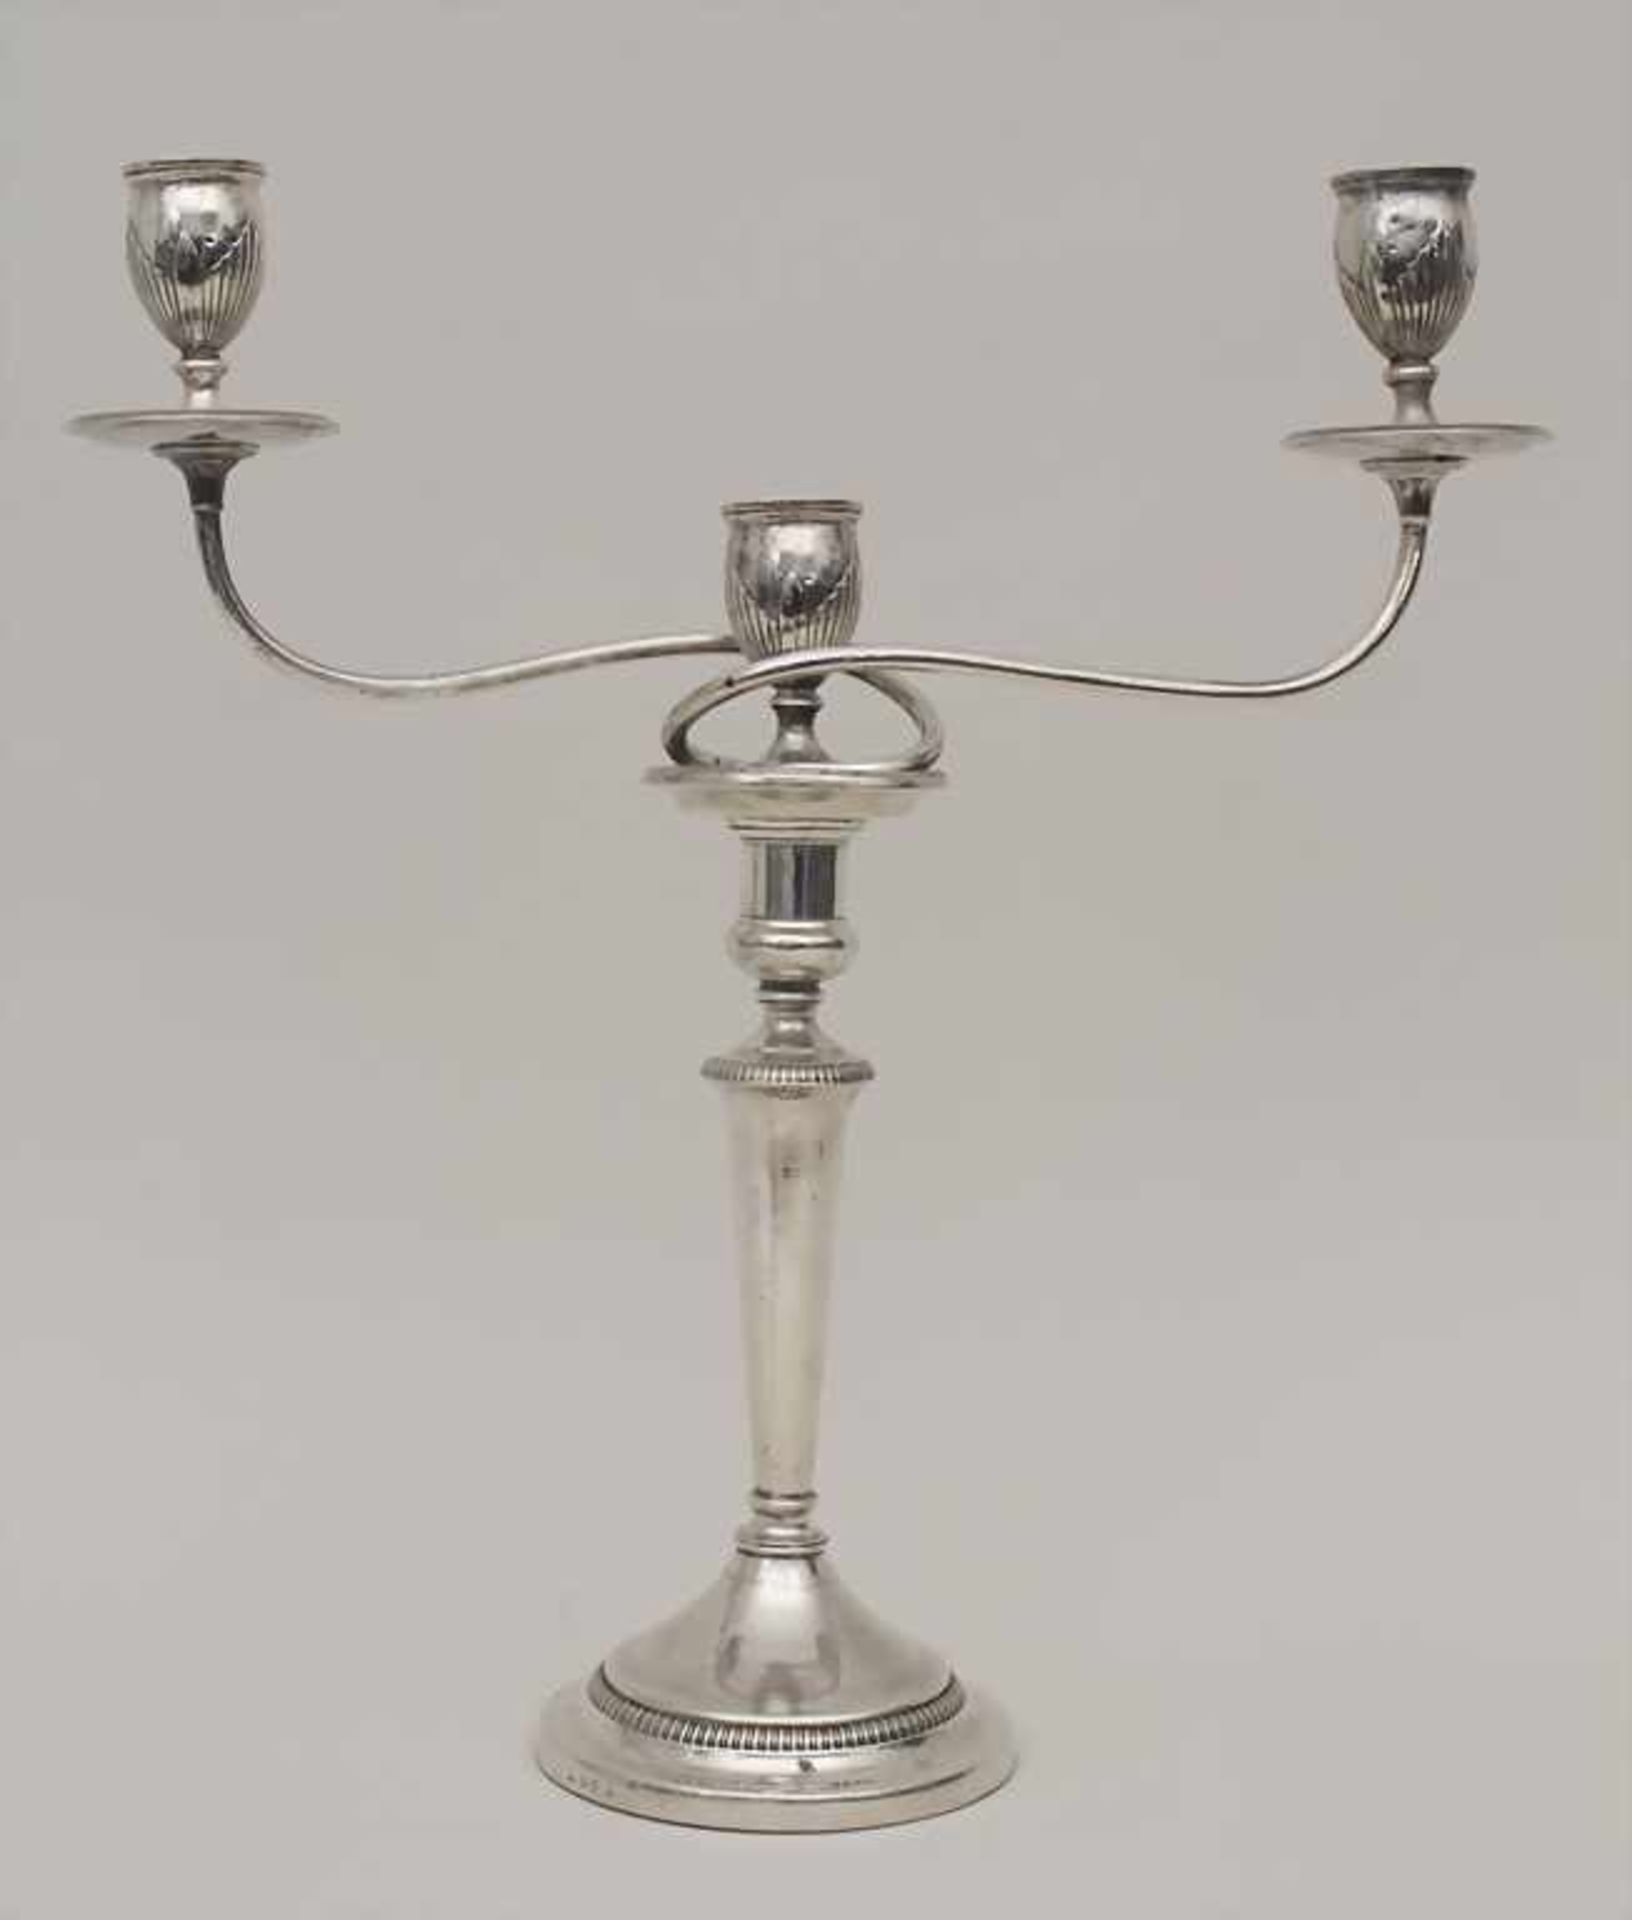 3-armiger Leuchter / A 3-arms silver chandelier, Nathaniel Smith & Co., Sheffield, um 1800